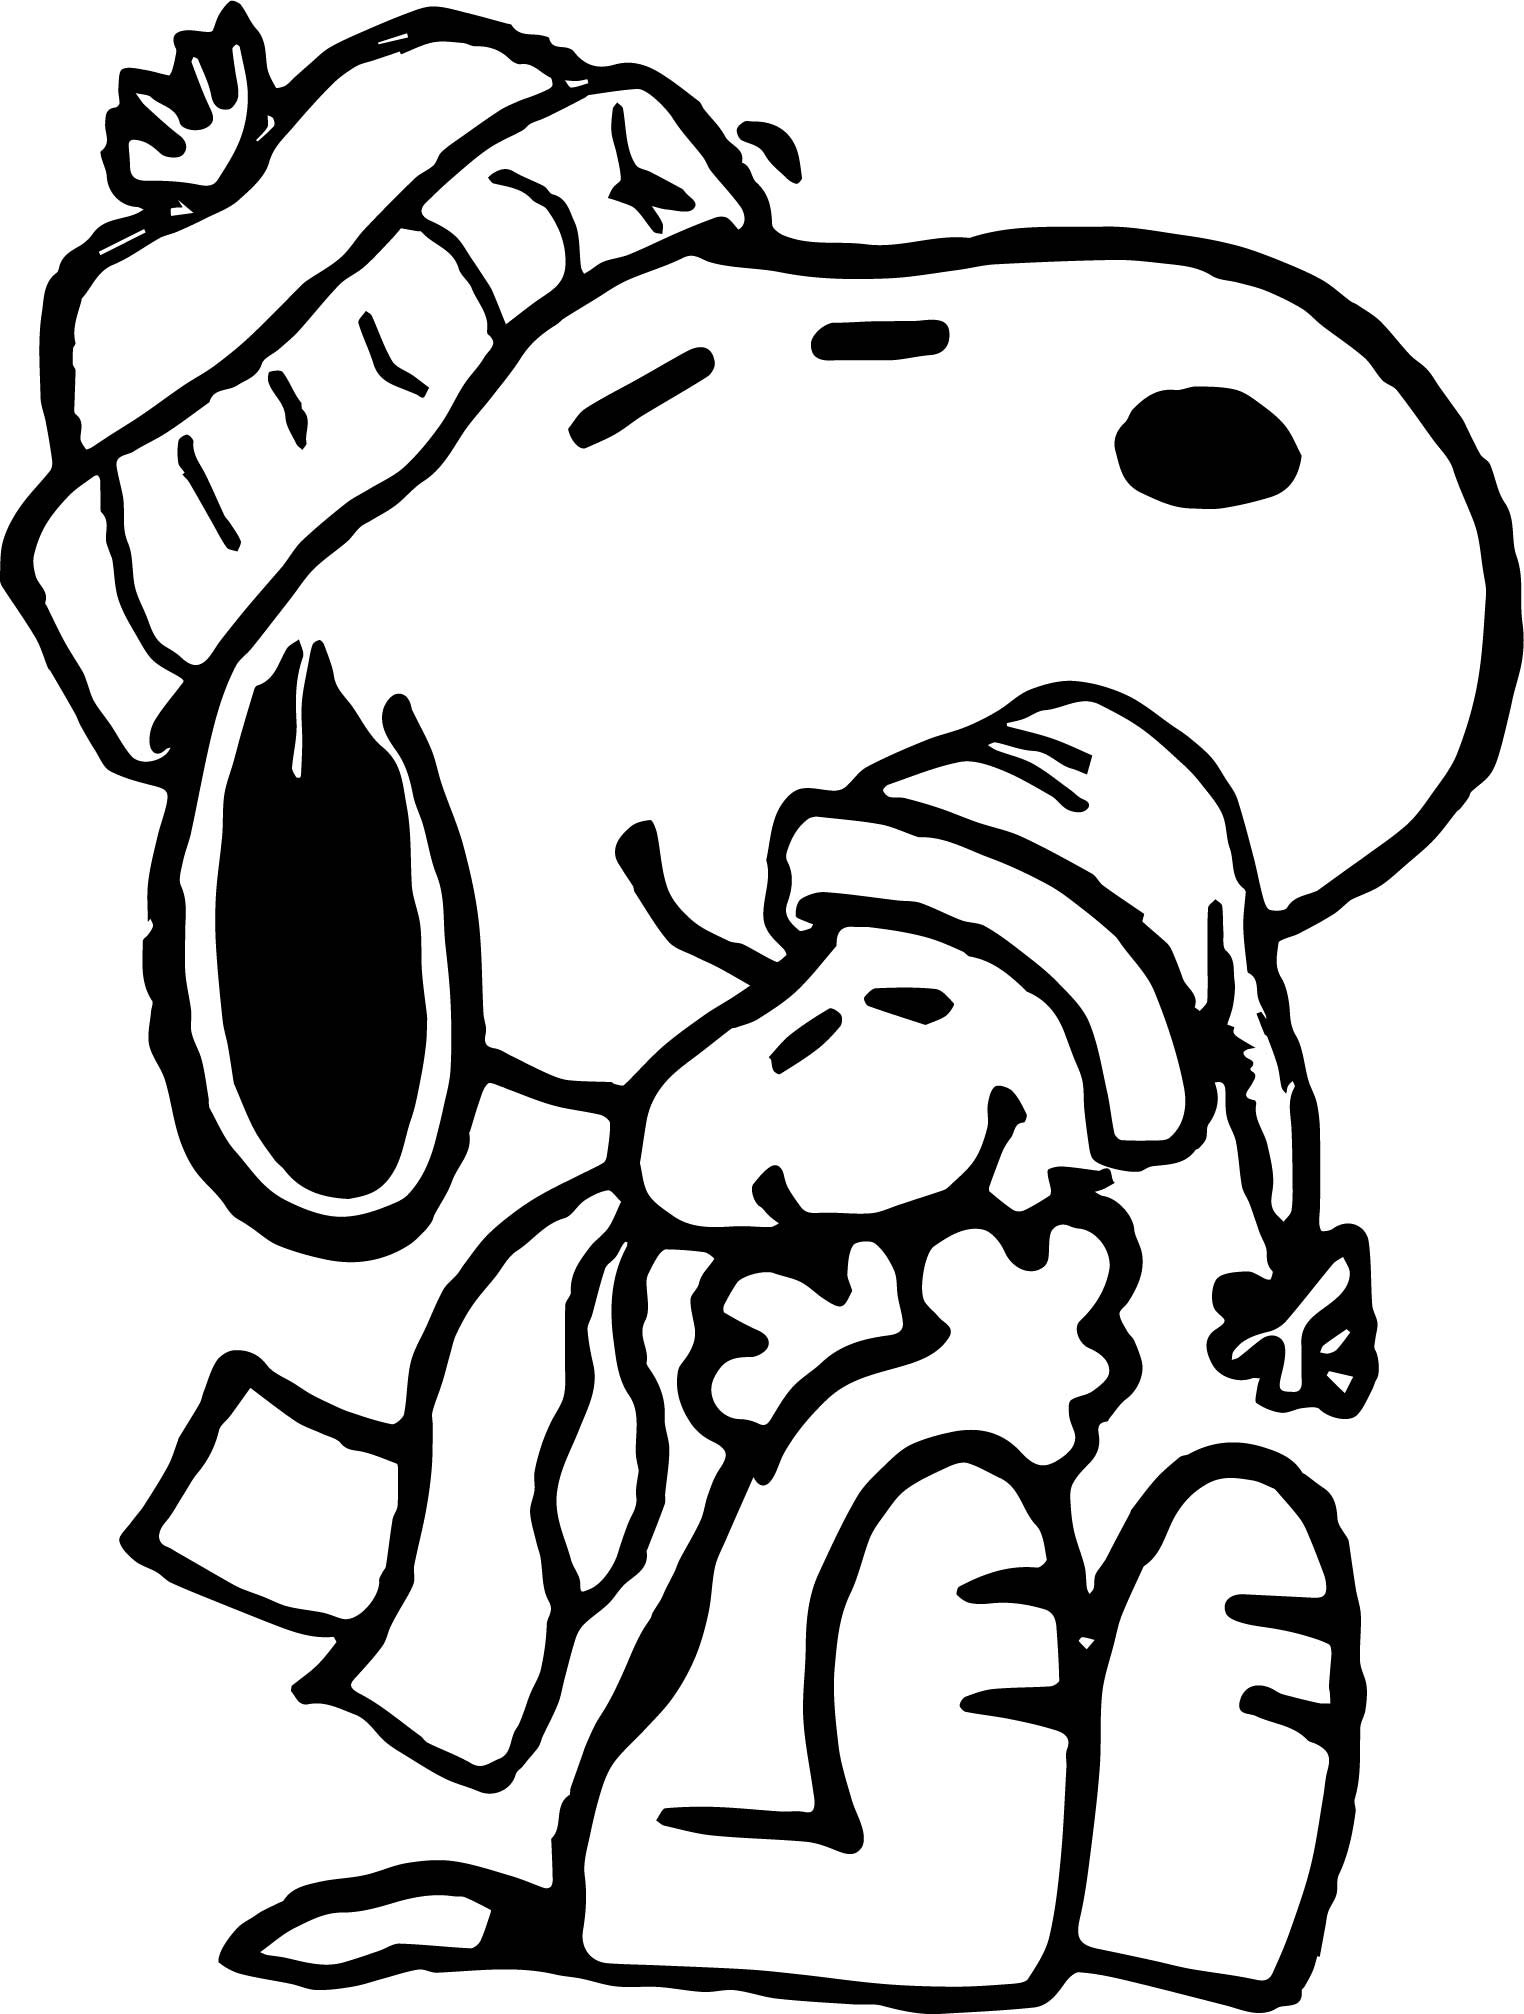 snoopy-christmas-drawing-free-download-on-clipartmag